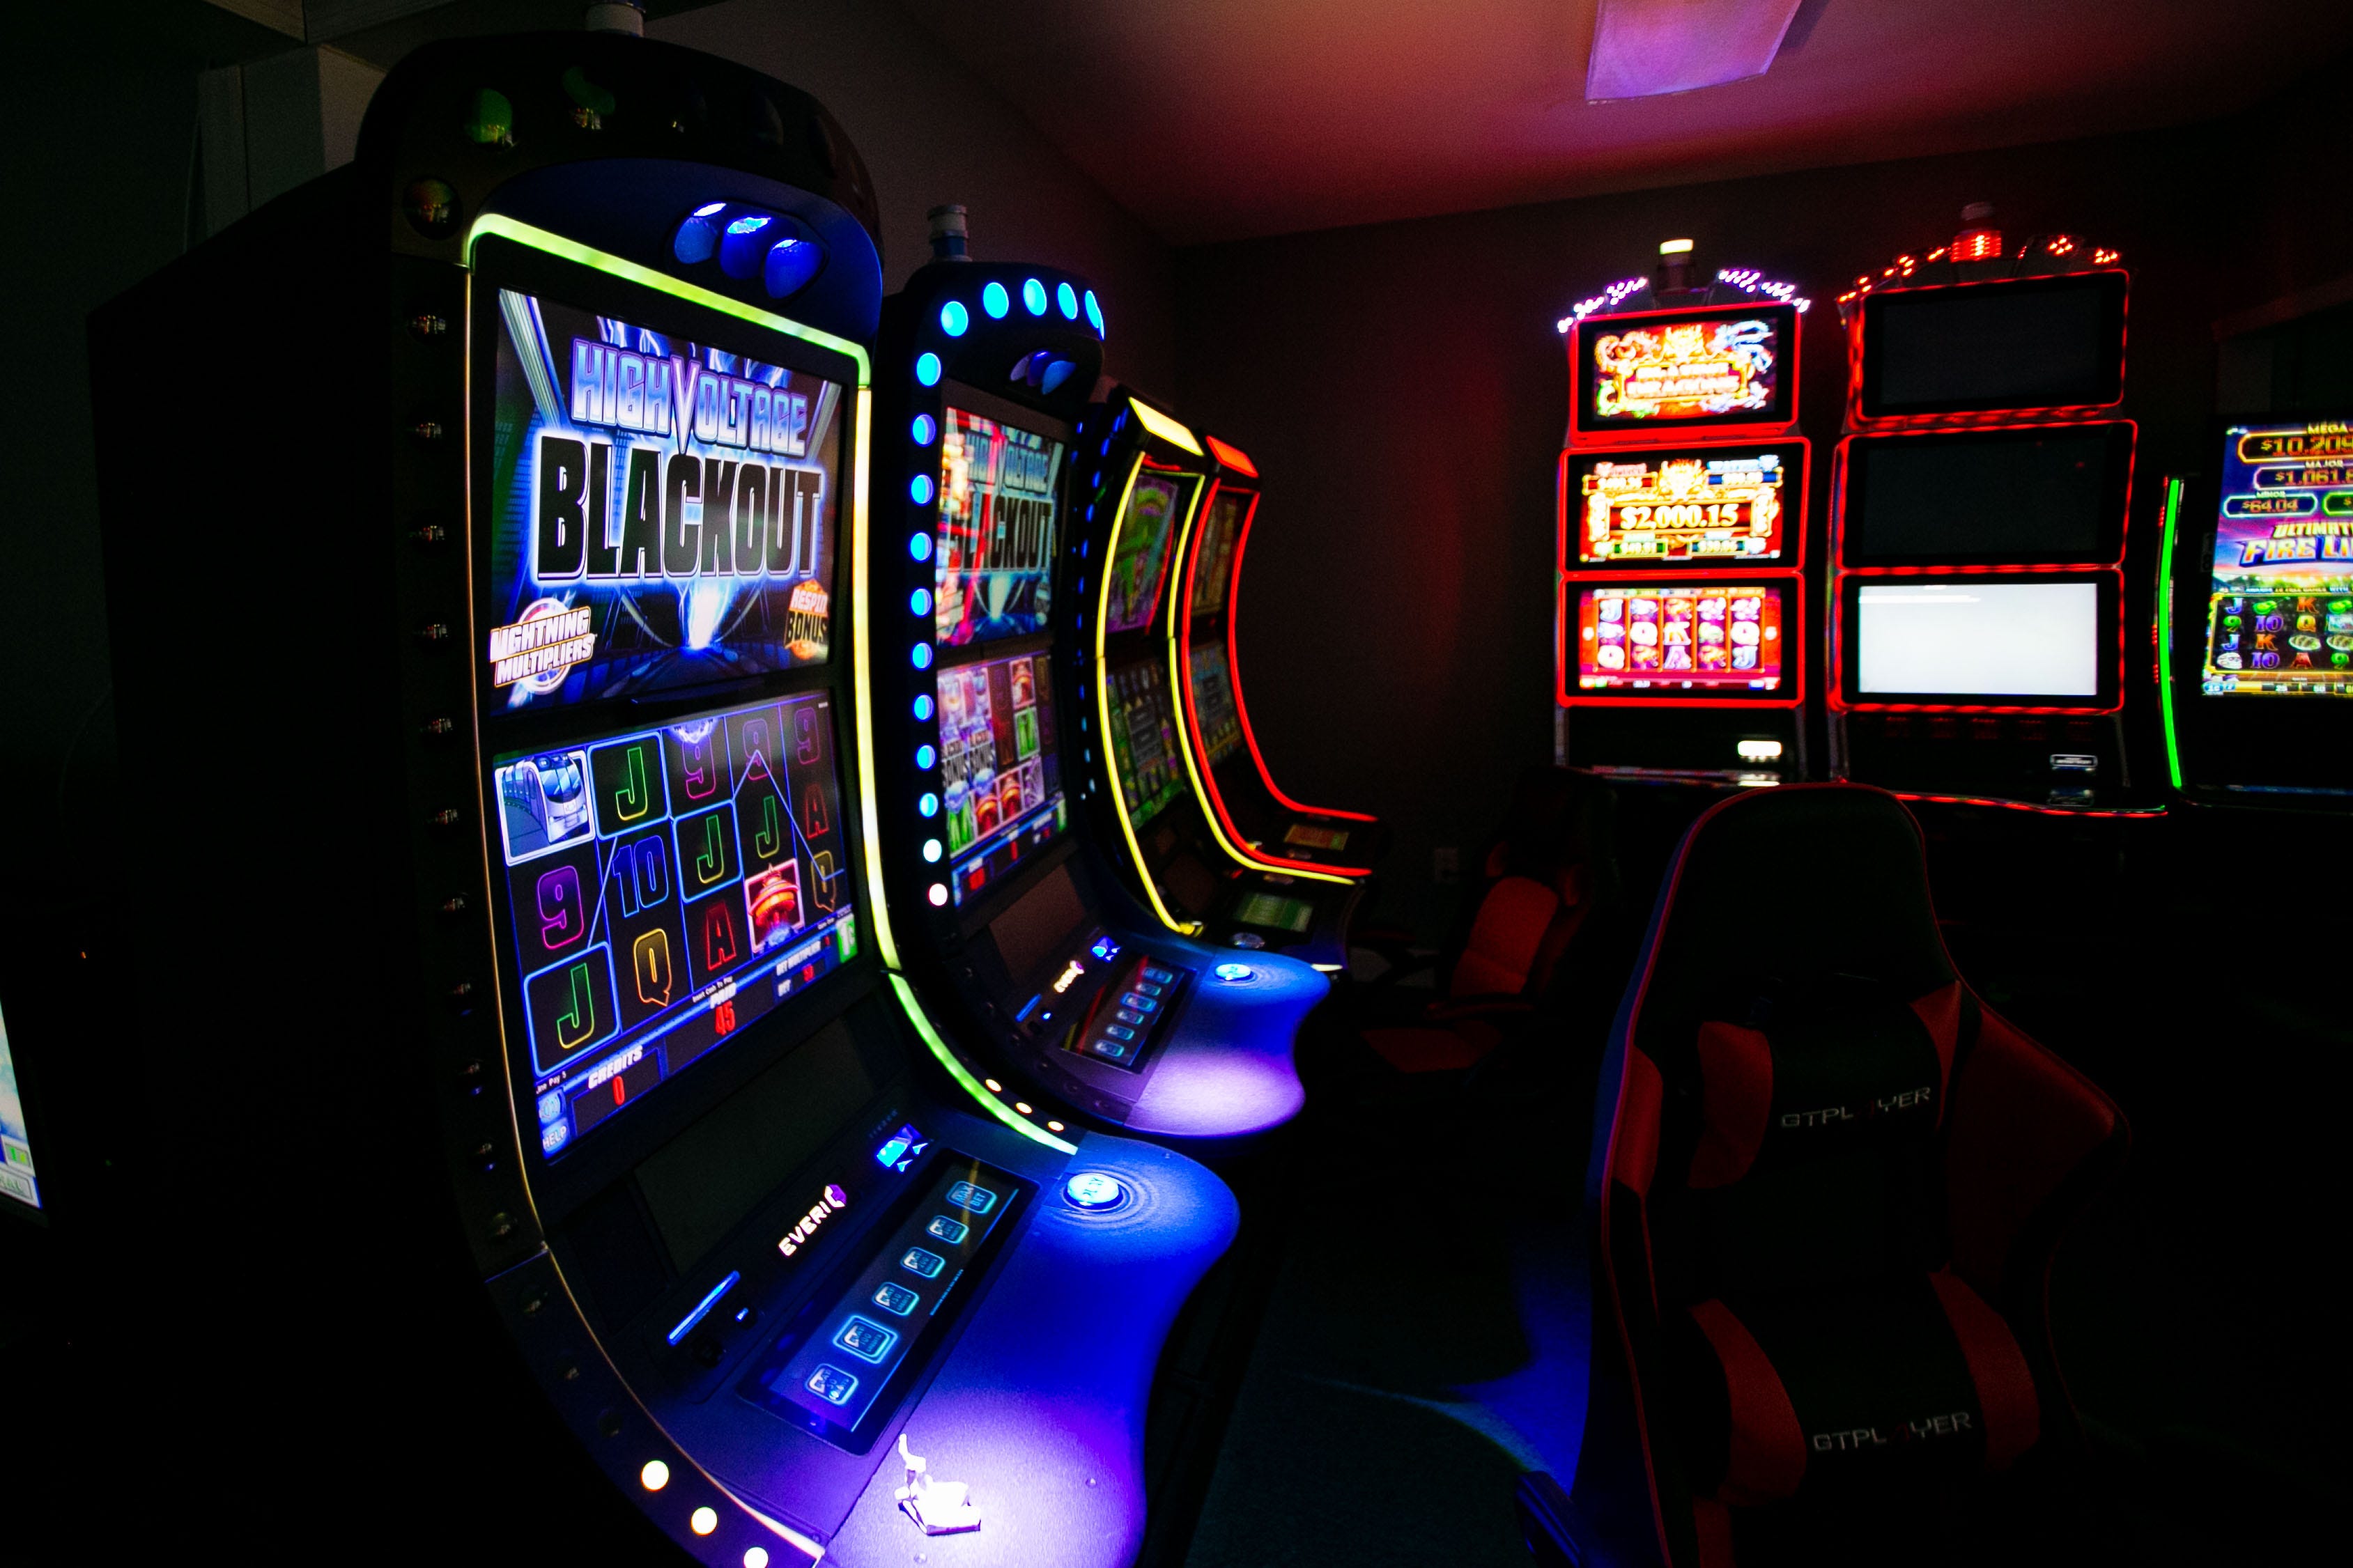 Florida Gaming Control Commission notifies six Tallahassee arcades